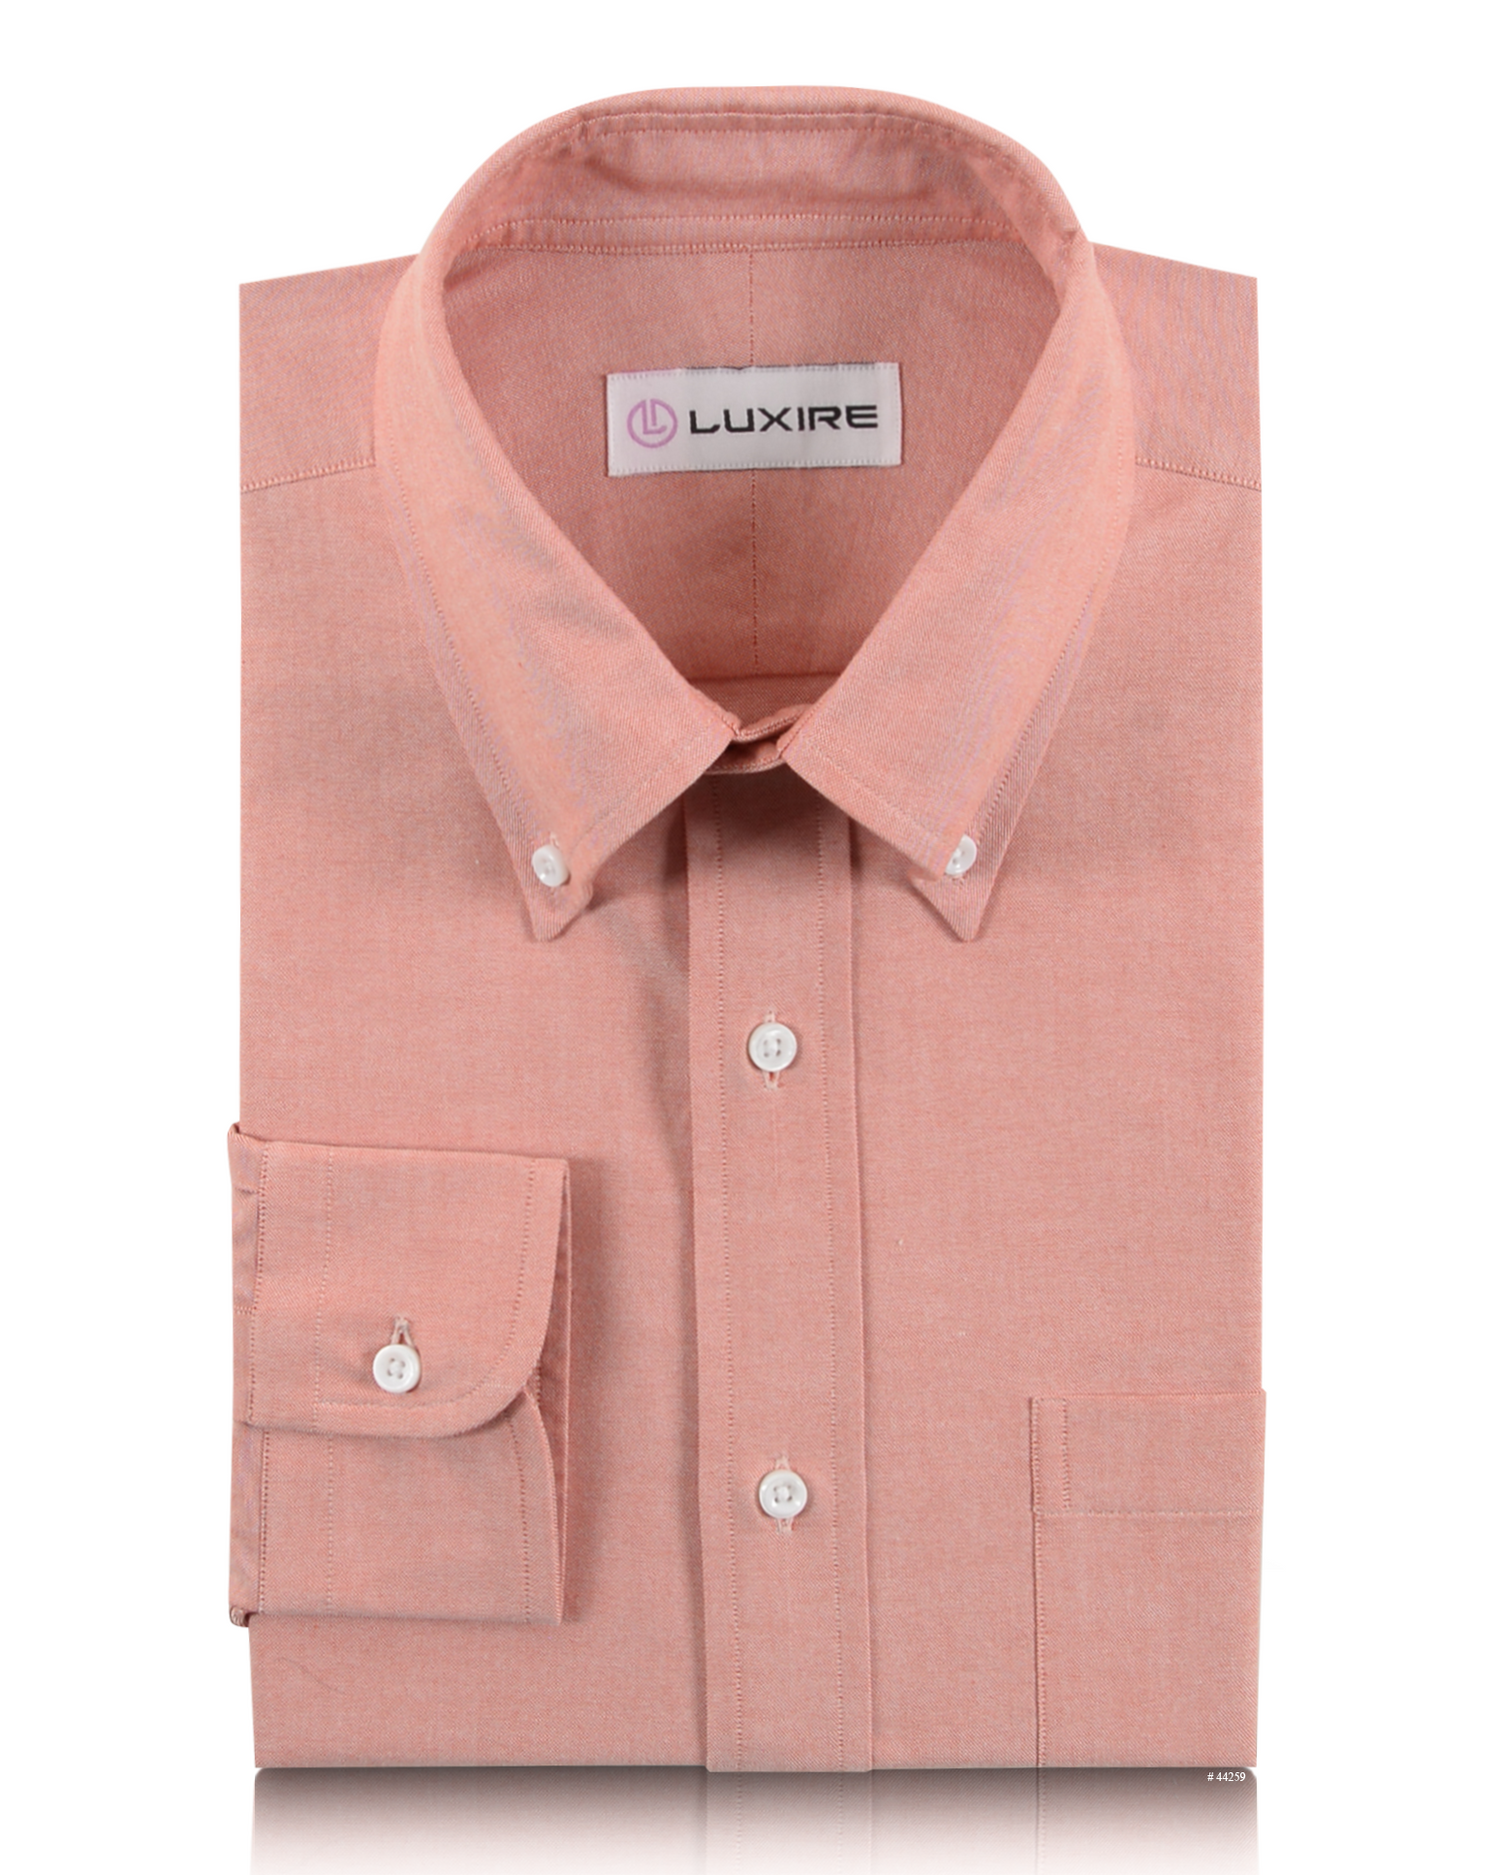 Front of the custom oxford shirt for men by Luxire in reddish orange